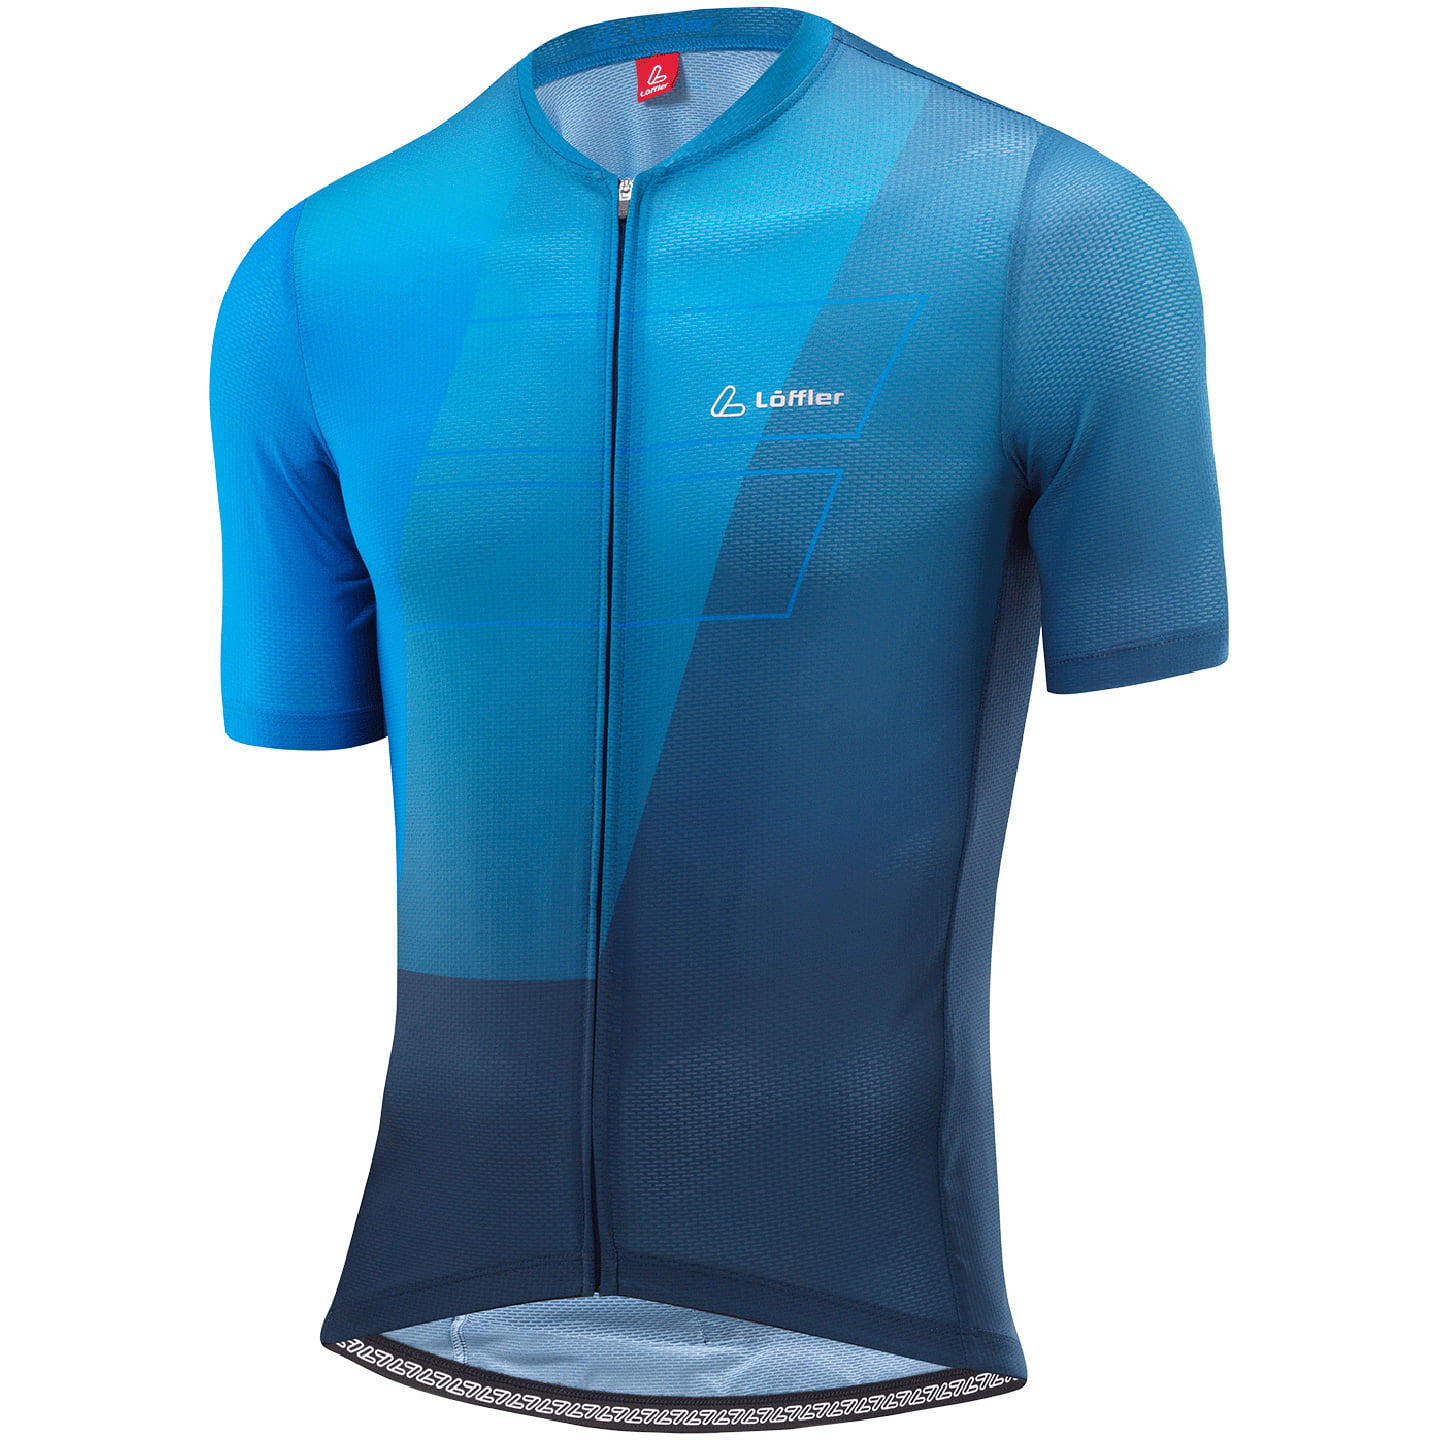 LOFFLER Vent Short Sleeve Jersey Short Sleeve Jersey, for men, size M, Cycling jersey, Cycling clothing